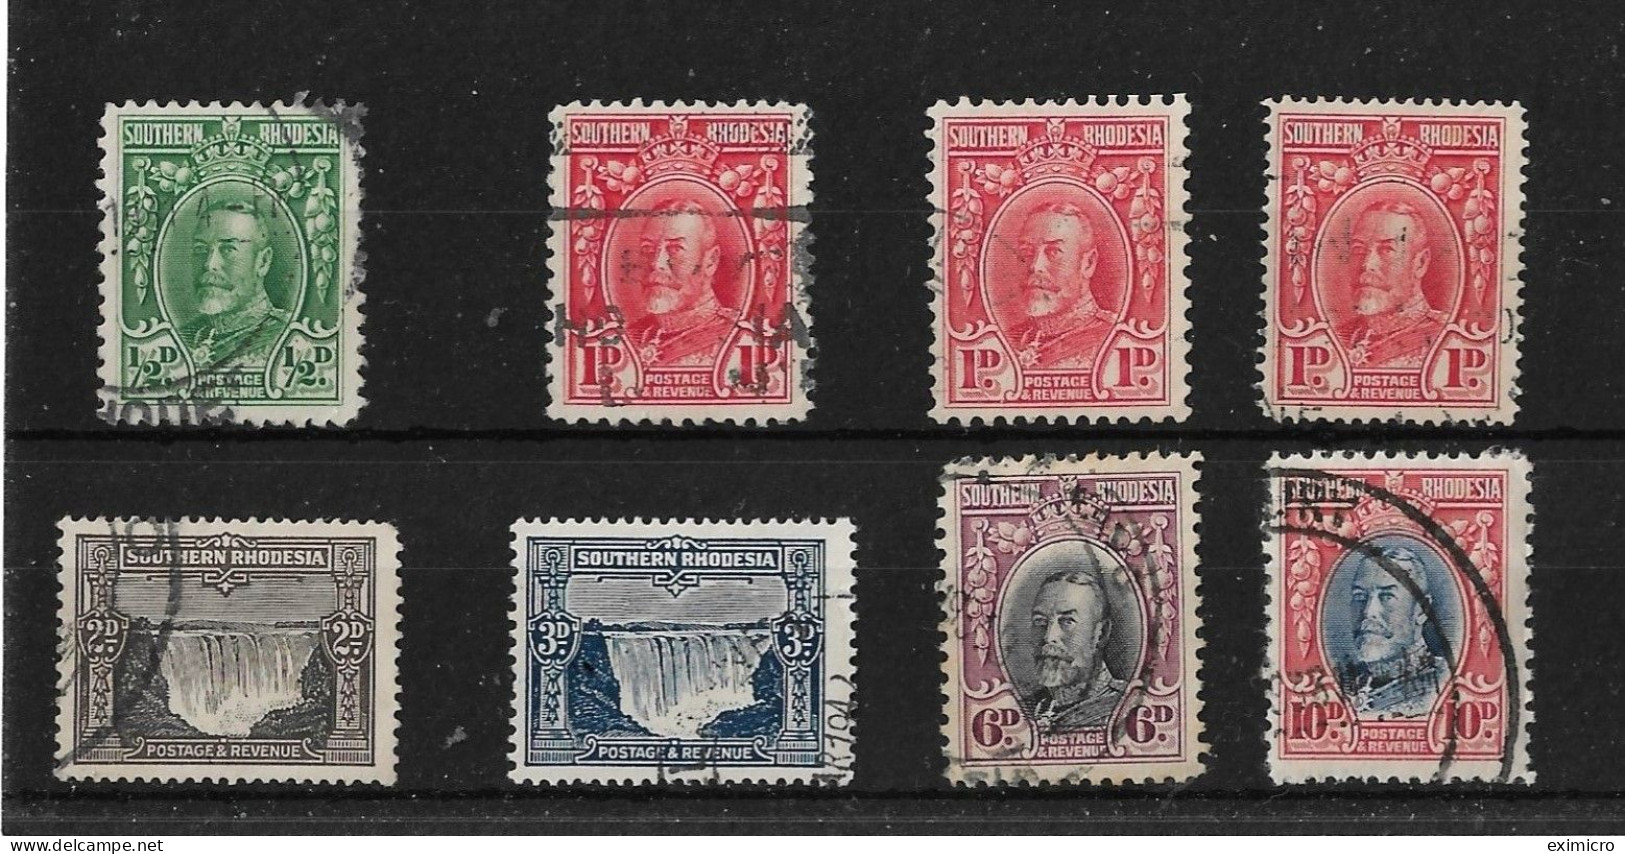 SOUTHERN RHODESIA 1931 - 1937 VALUES TO 10d SG 15,16,16a,16b,17,18,20,22 FINE USED Cat £25+ - Rodesia Del Sur (...-1964)